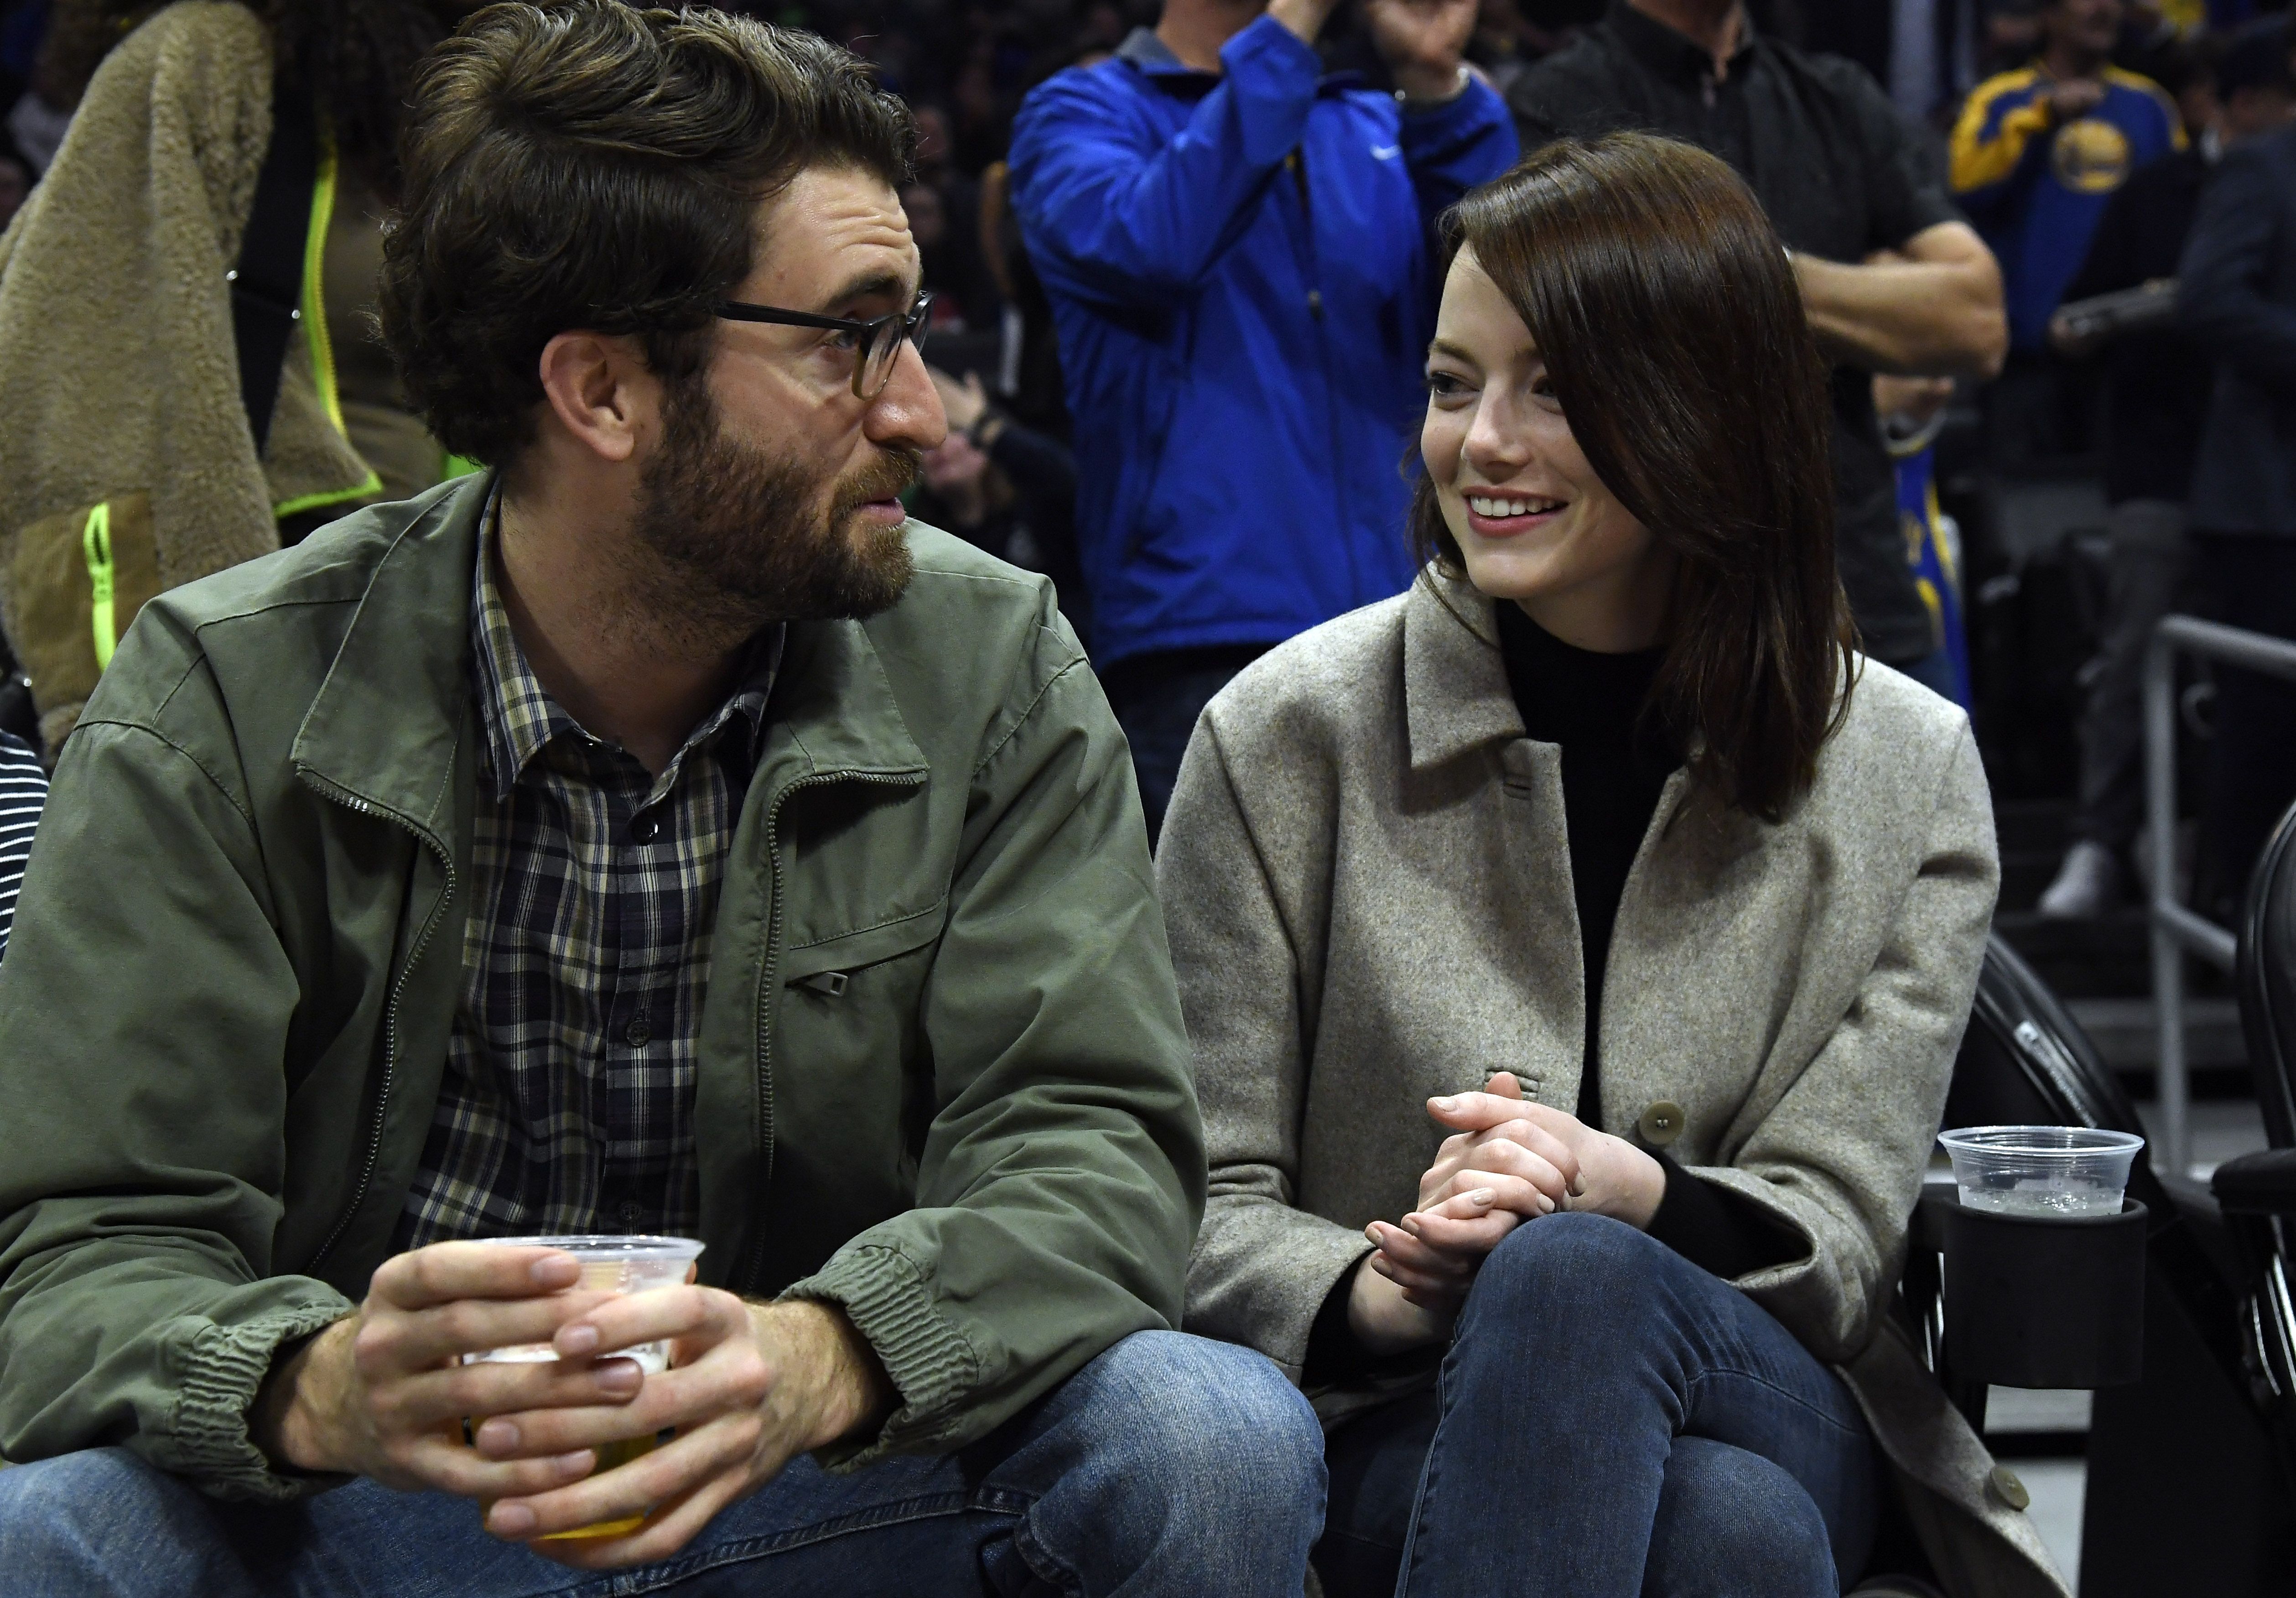 Emma Stone and Dave McCary's Relationship Timeline